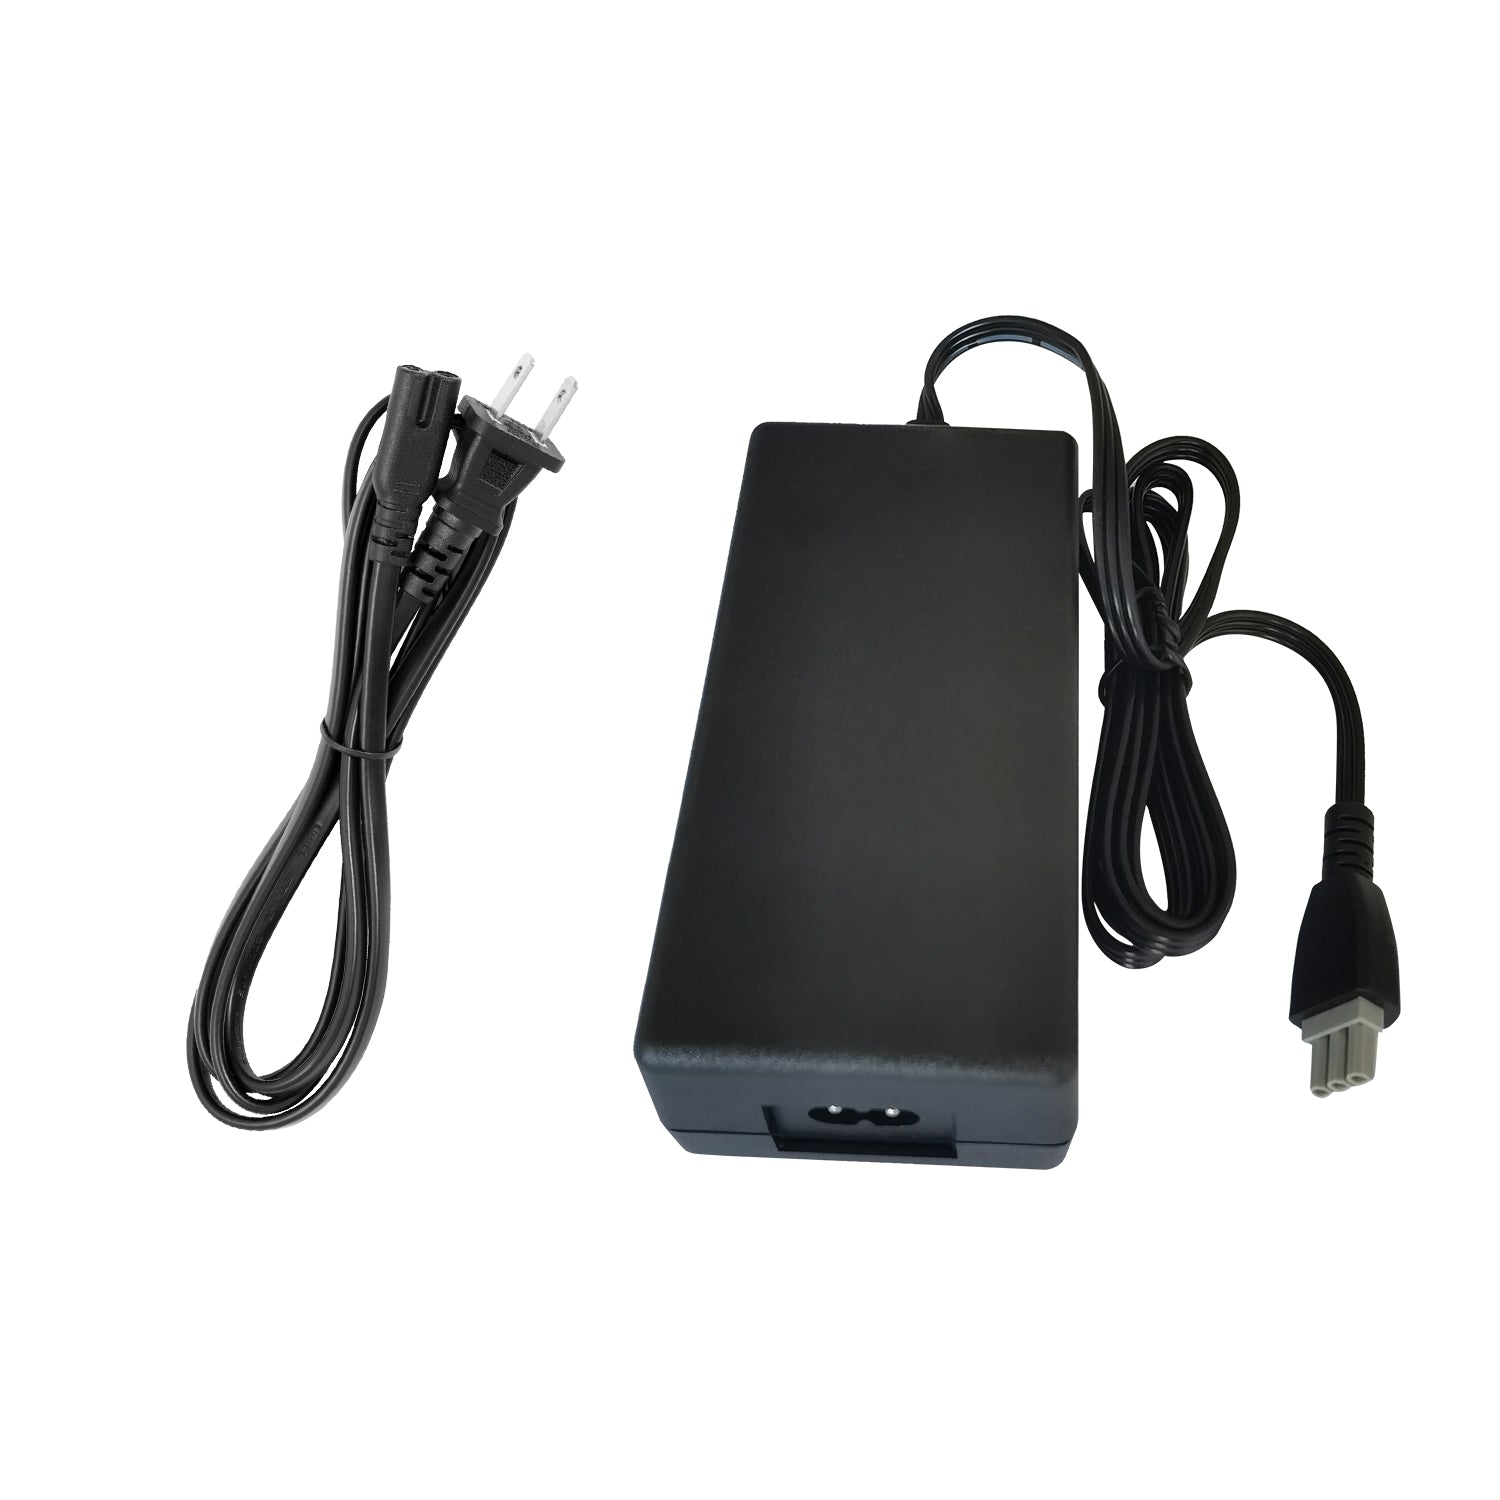 Power Adapter for HP PSC 1510 All-in-One Printer.